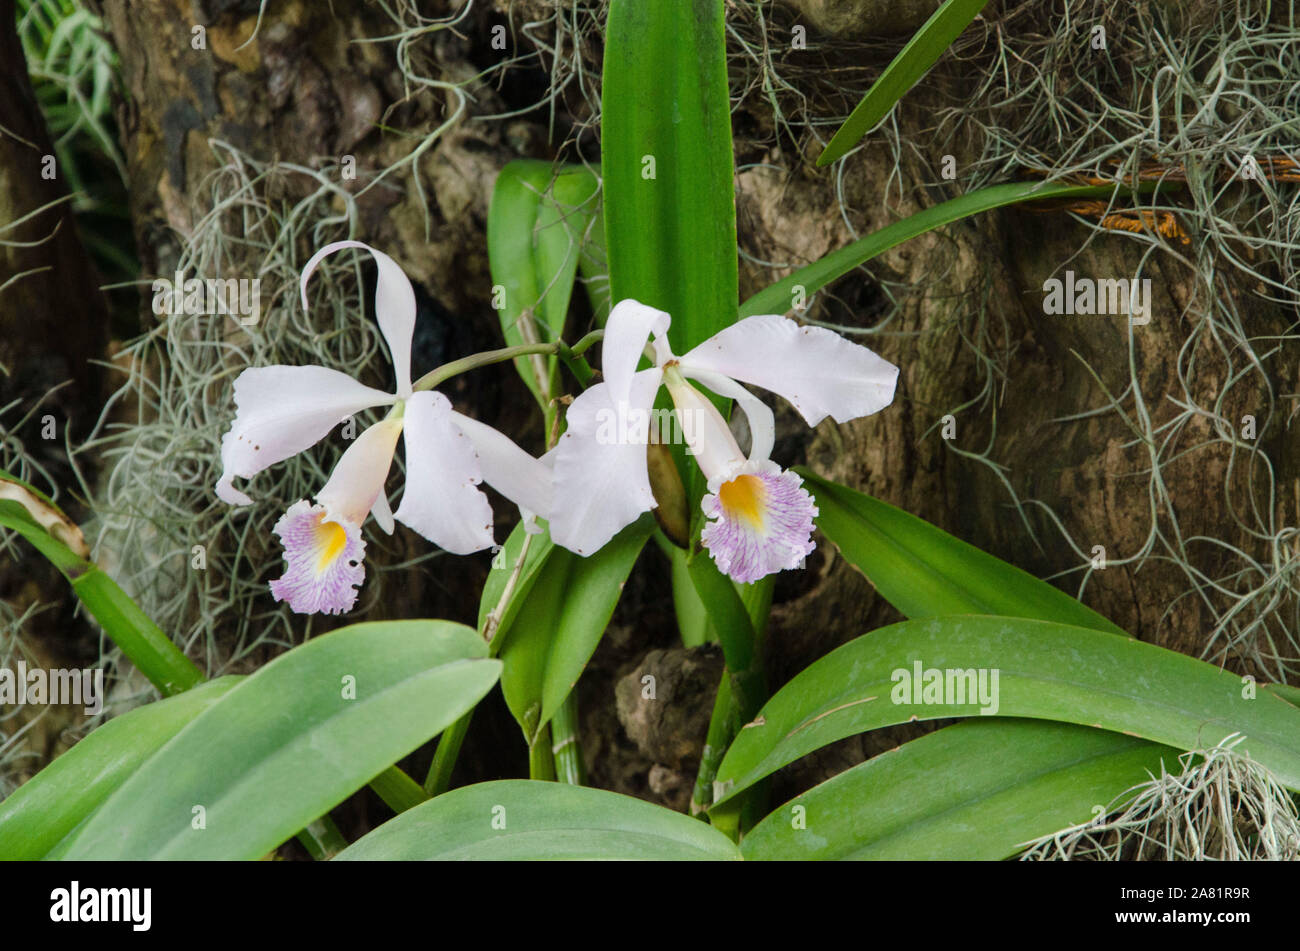 Cattleya schroederae, a beautiful white, purple and yellow tropical flower in a natural environment Stock Photo